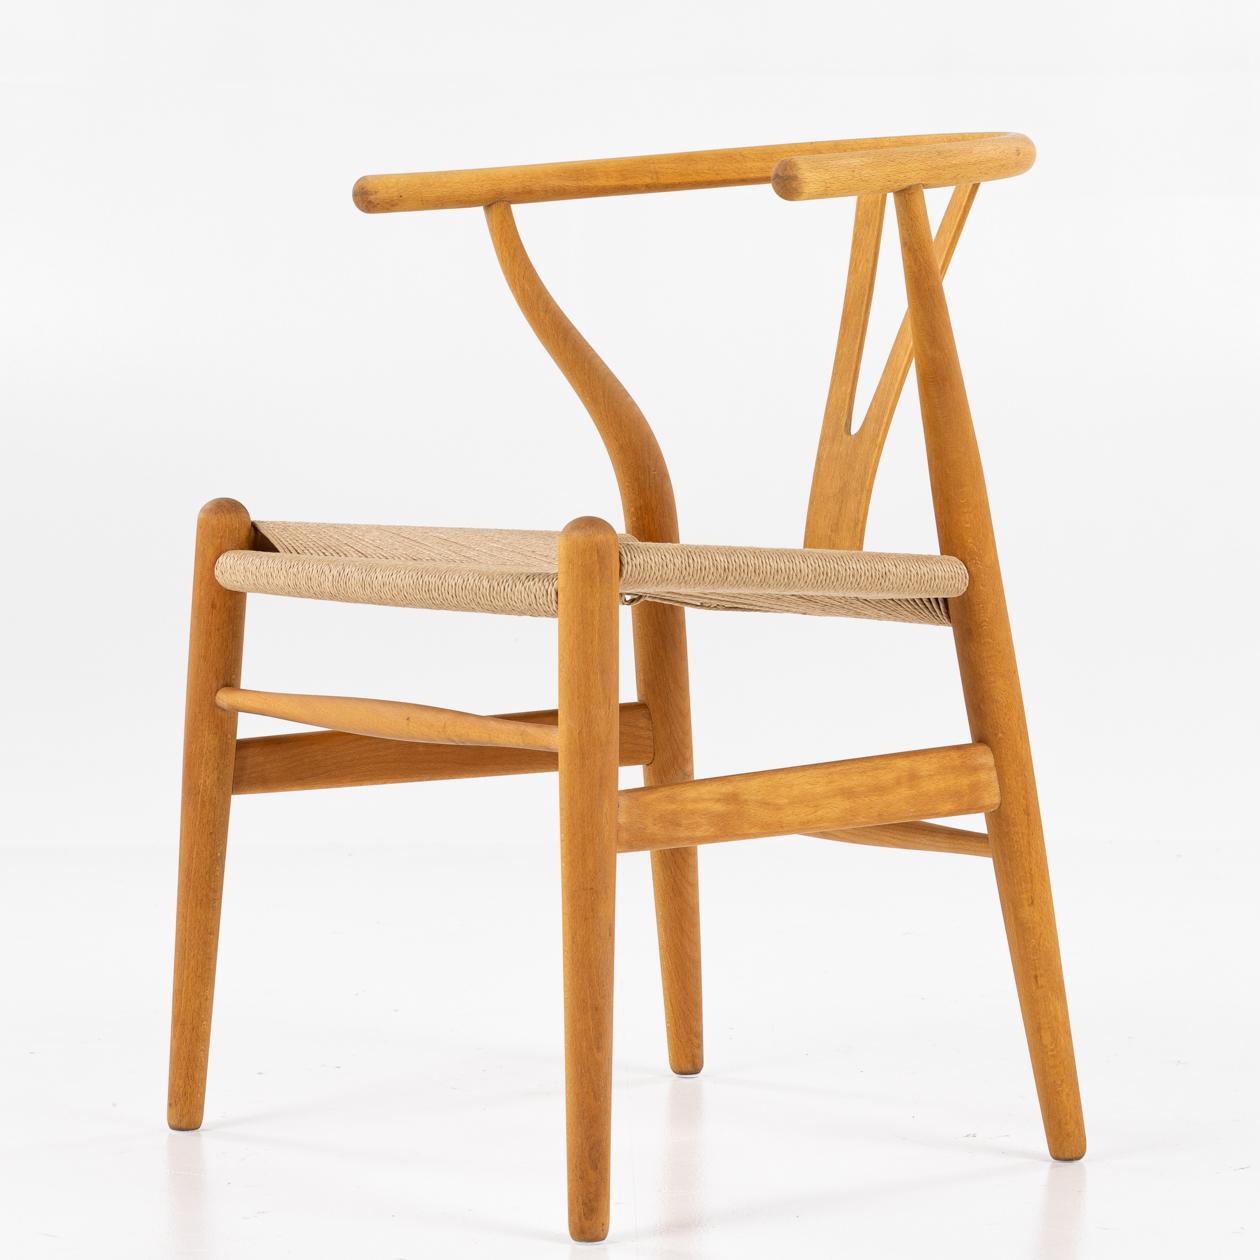 Set of four CH 24 - Wishbone Chairs in patinated beech and new paper cord. Hans J. Wegner / Carl Hansen